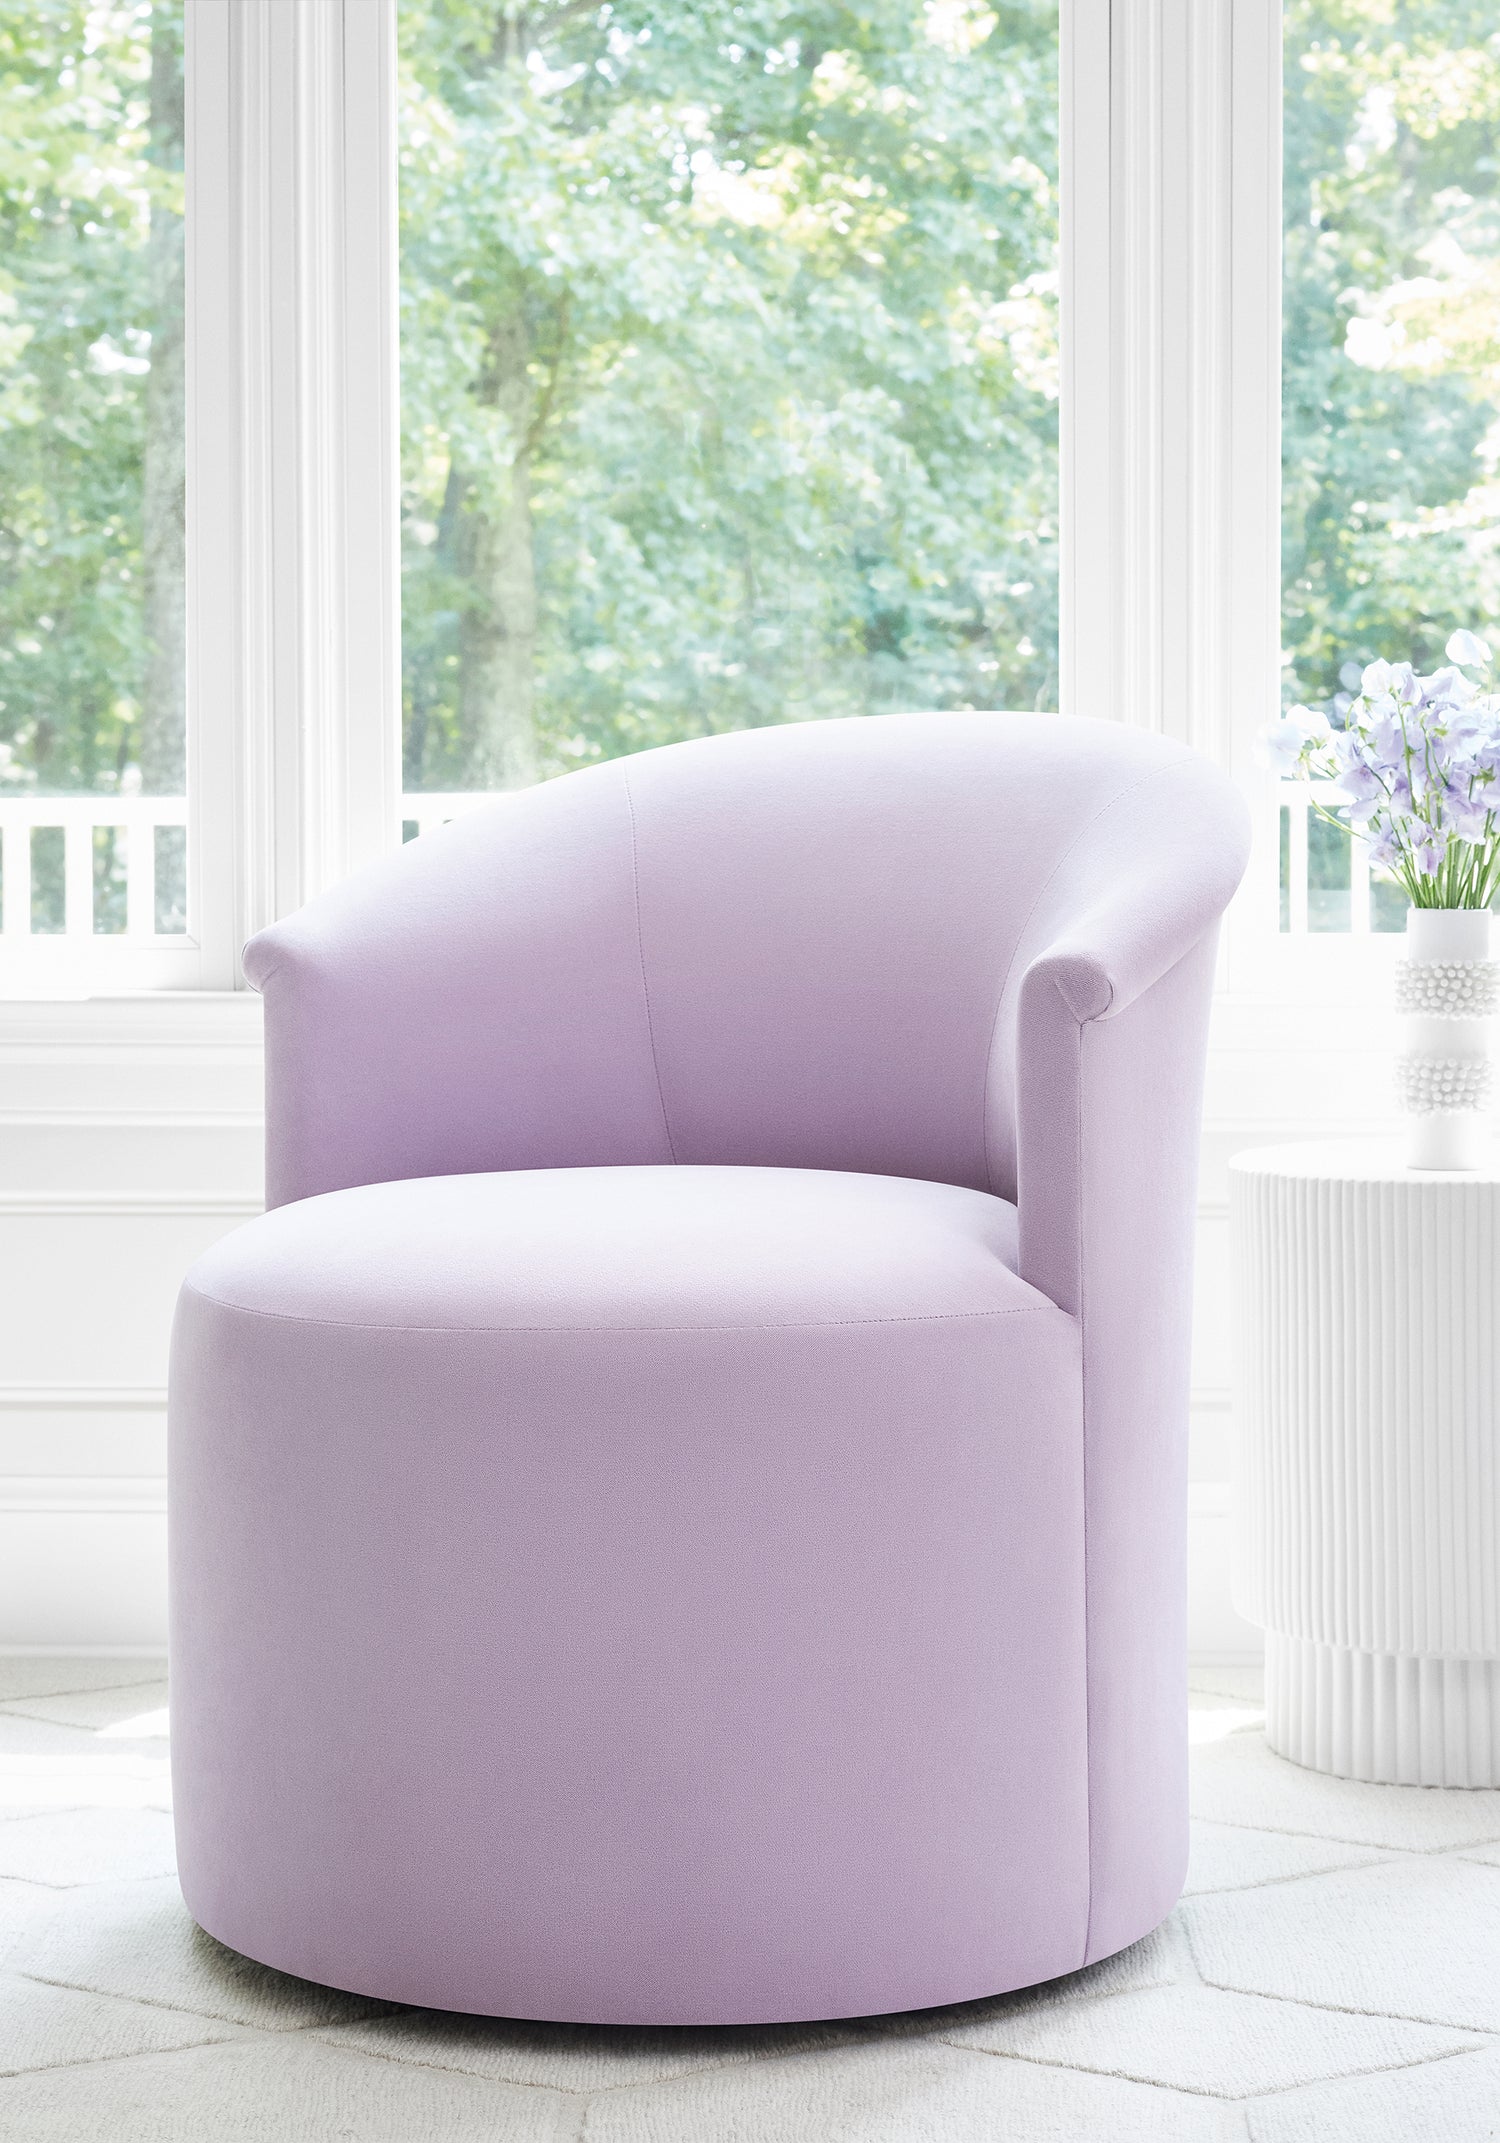 Ashby chair with Swivel in Club Velvet sustainable woven fabric in lilac color - pattern number W7214 by Thibaut in the Club Velvet collection